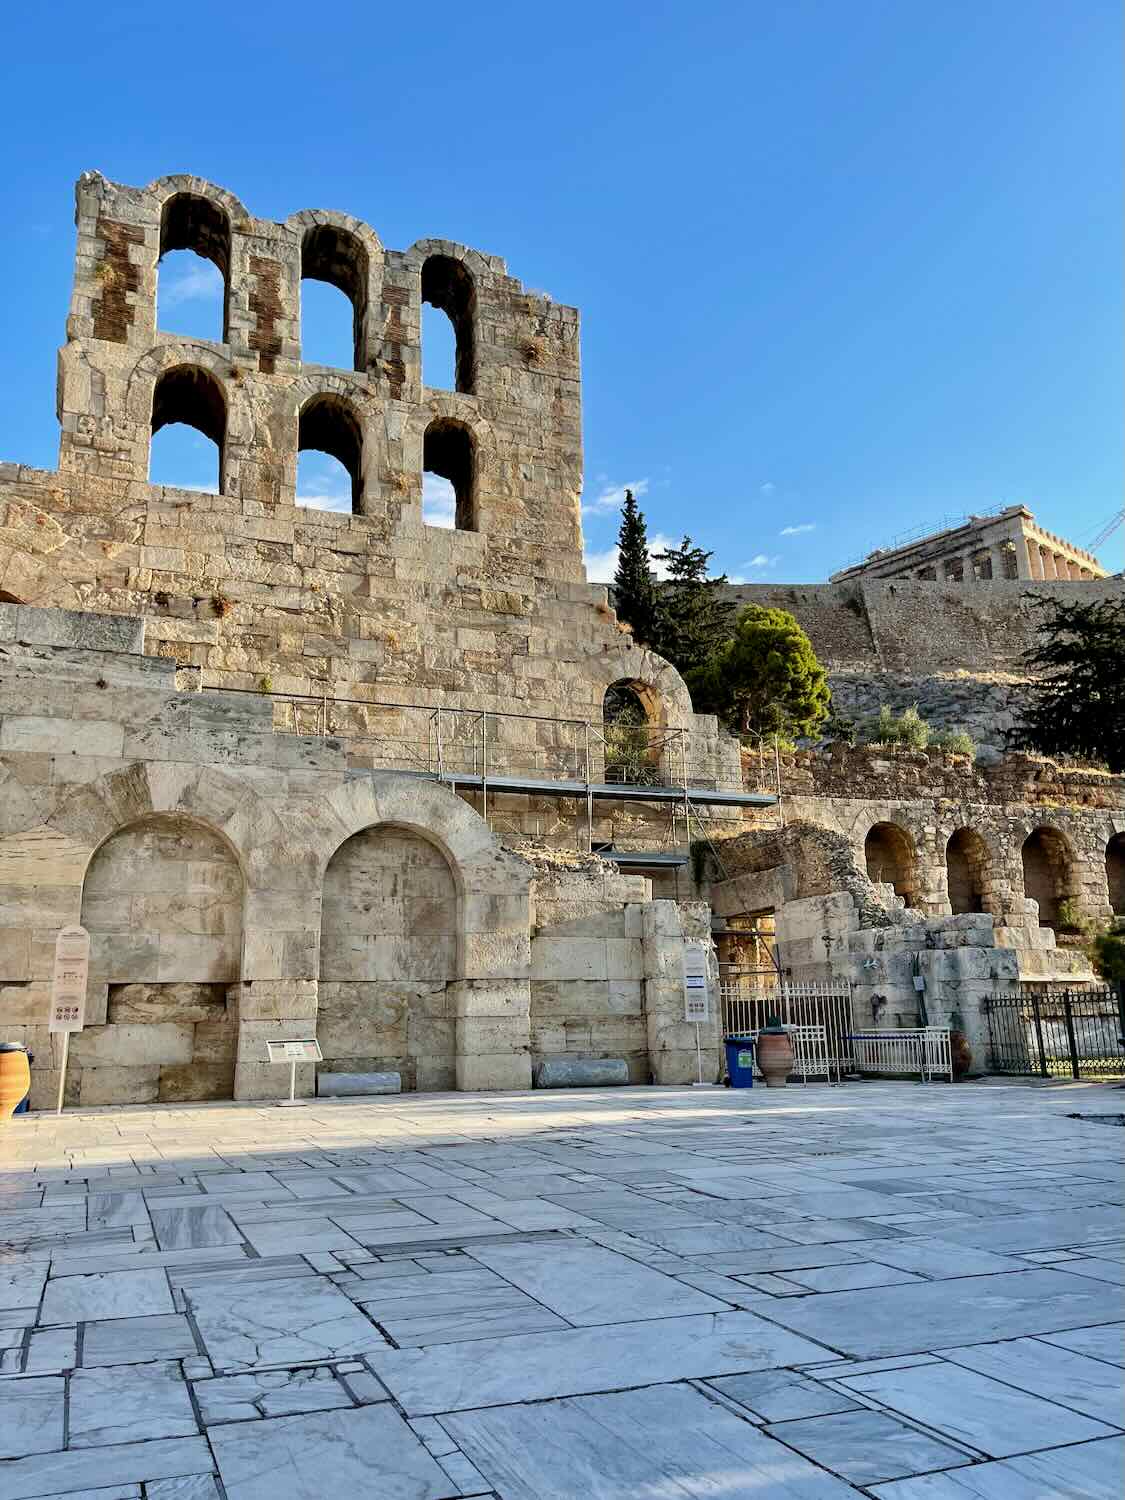 A photo of the Odeon of Herodes Atticus, a stone theatre structure with arched windows and a large stone-paved foreground, located at the Acropolis of Athens, Greece.